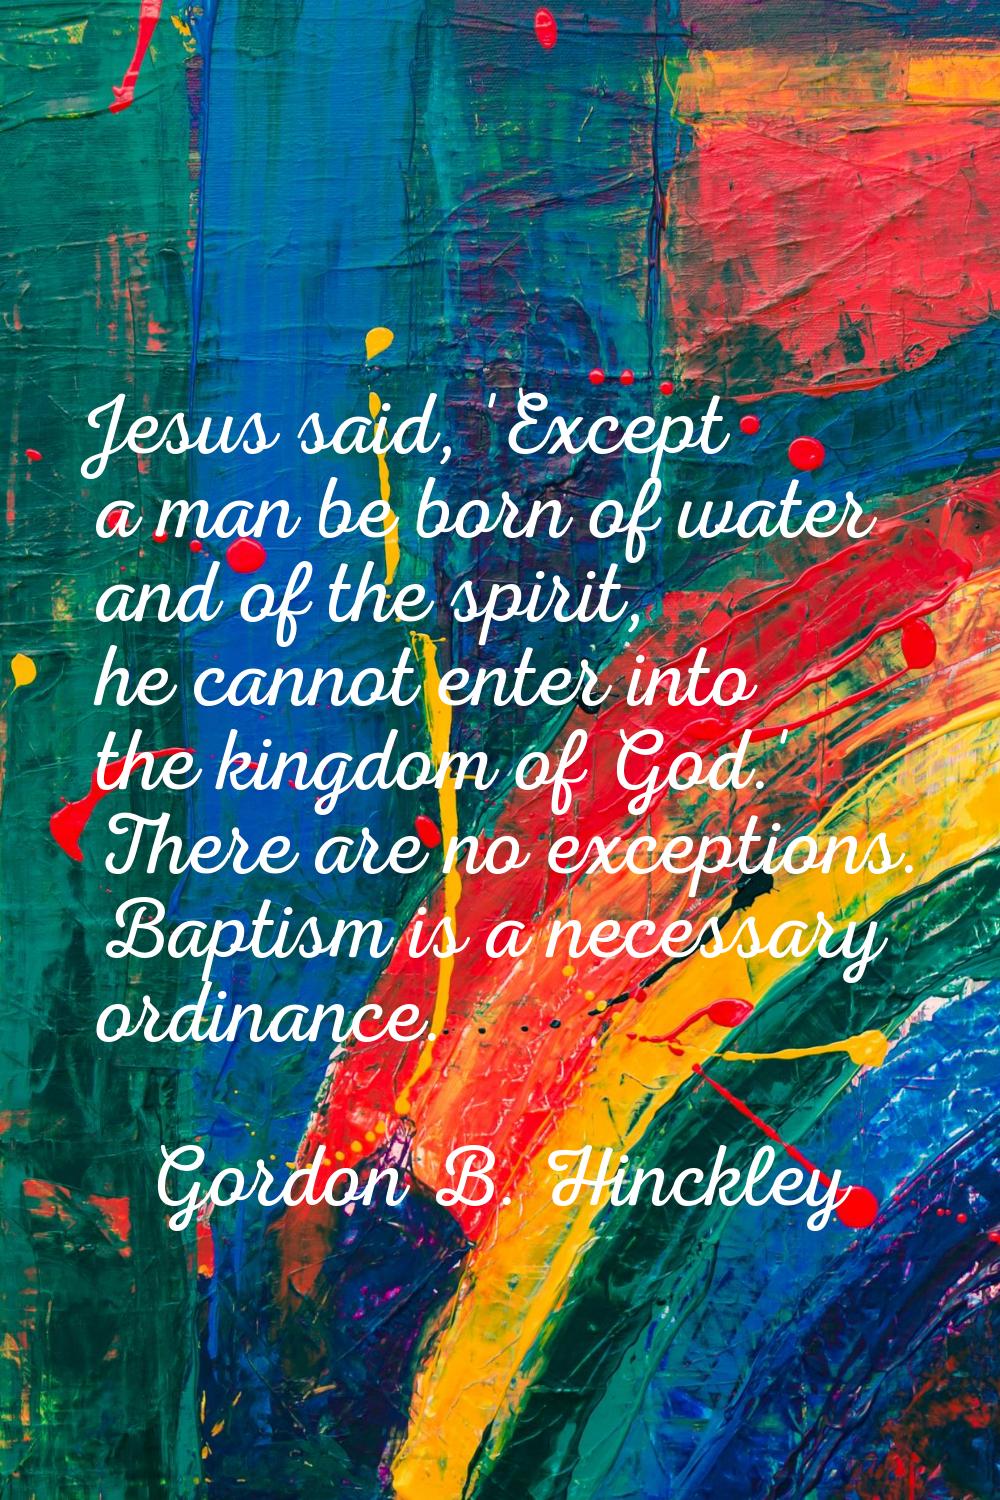 Jesus said, 'Except a man be born of water and of the spirit, he cannot enter into the kingdom of G